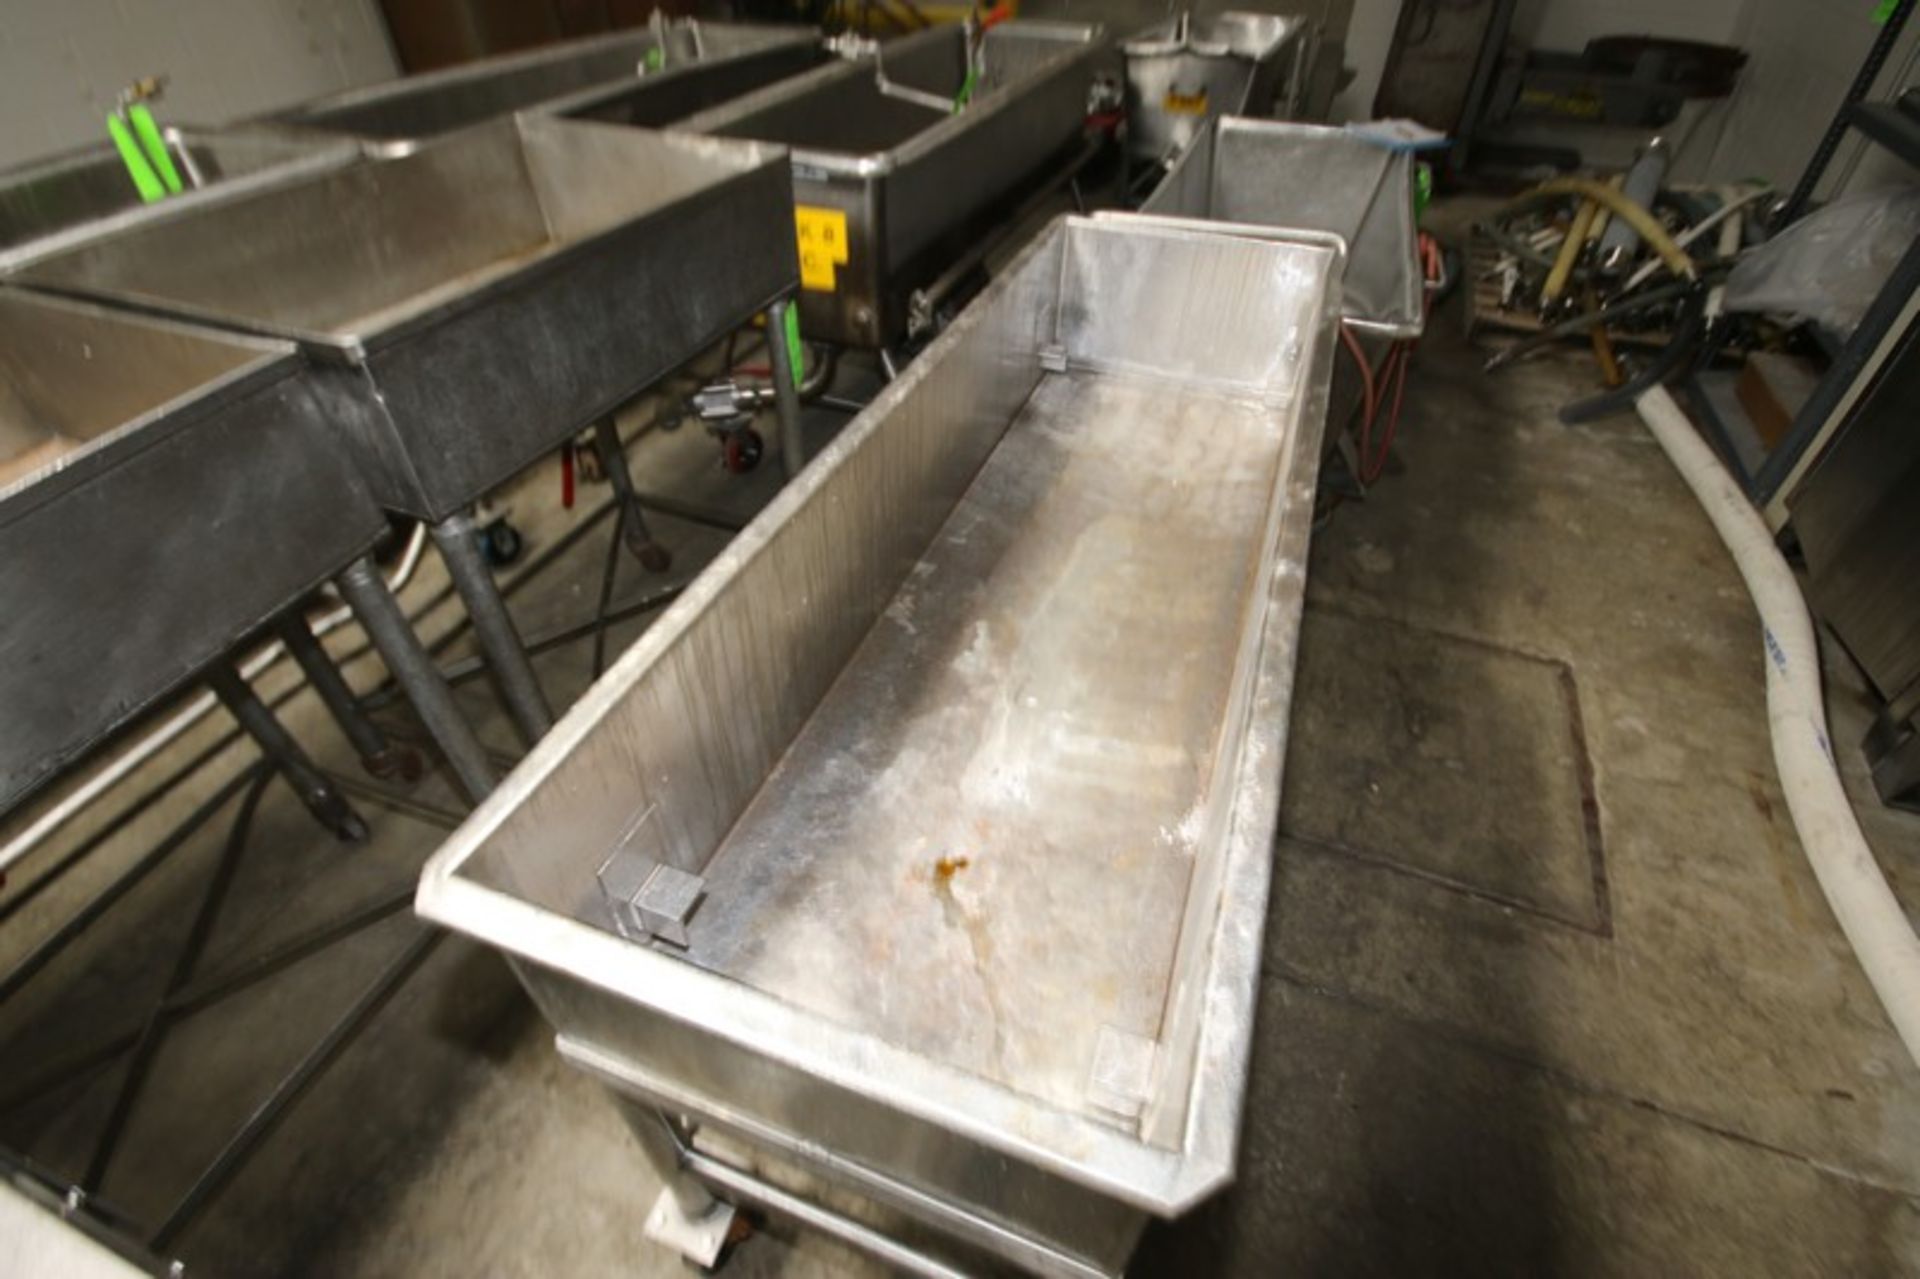 S/S Portable Trough, Internal Dims.: Aprox. 63-1/2" L x 19" W x 12" Deep, Mounted on S/S Portable - Image 3 of 3